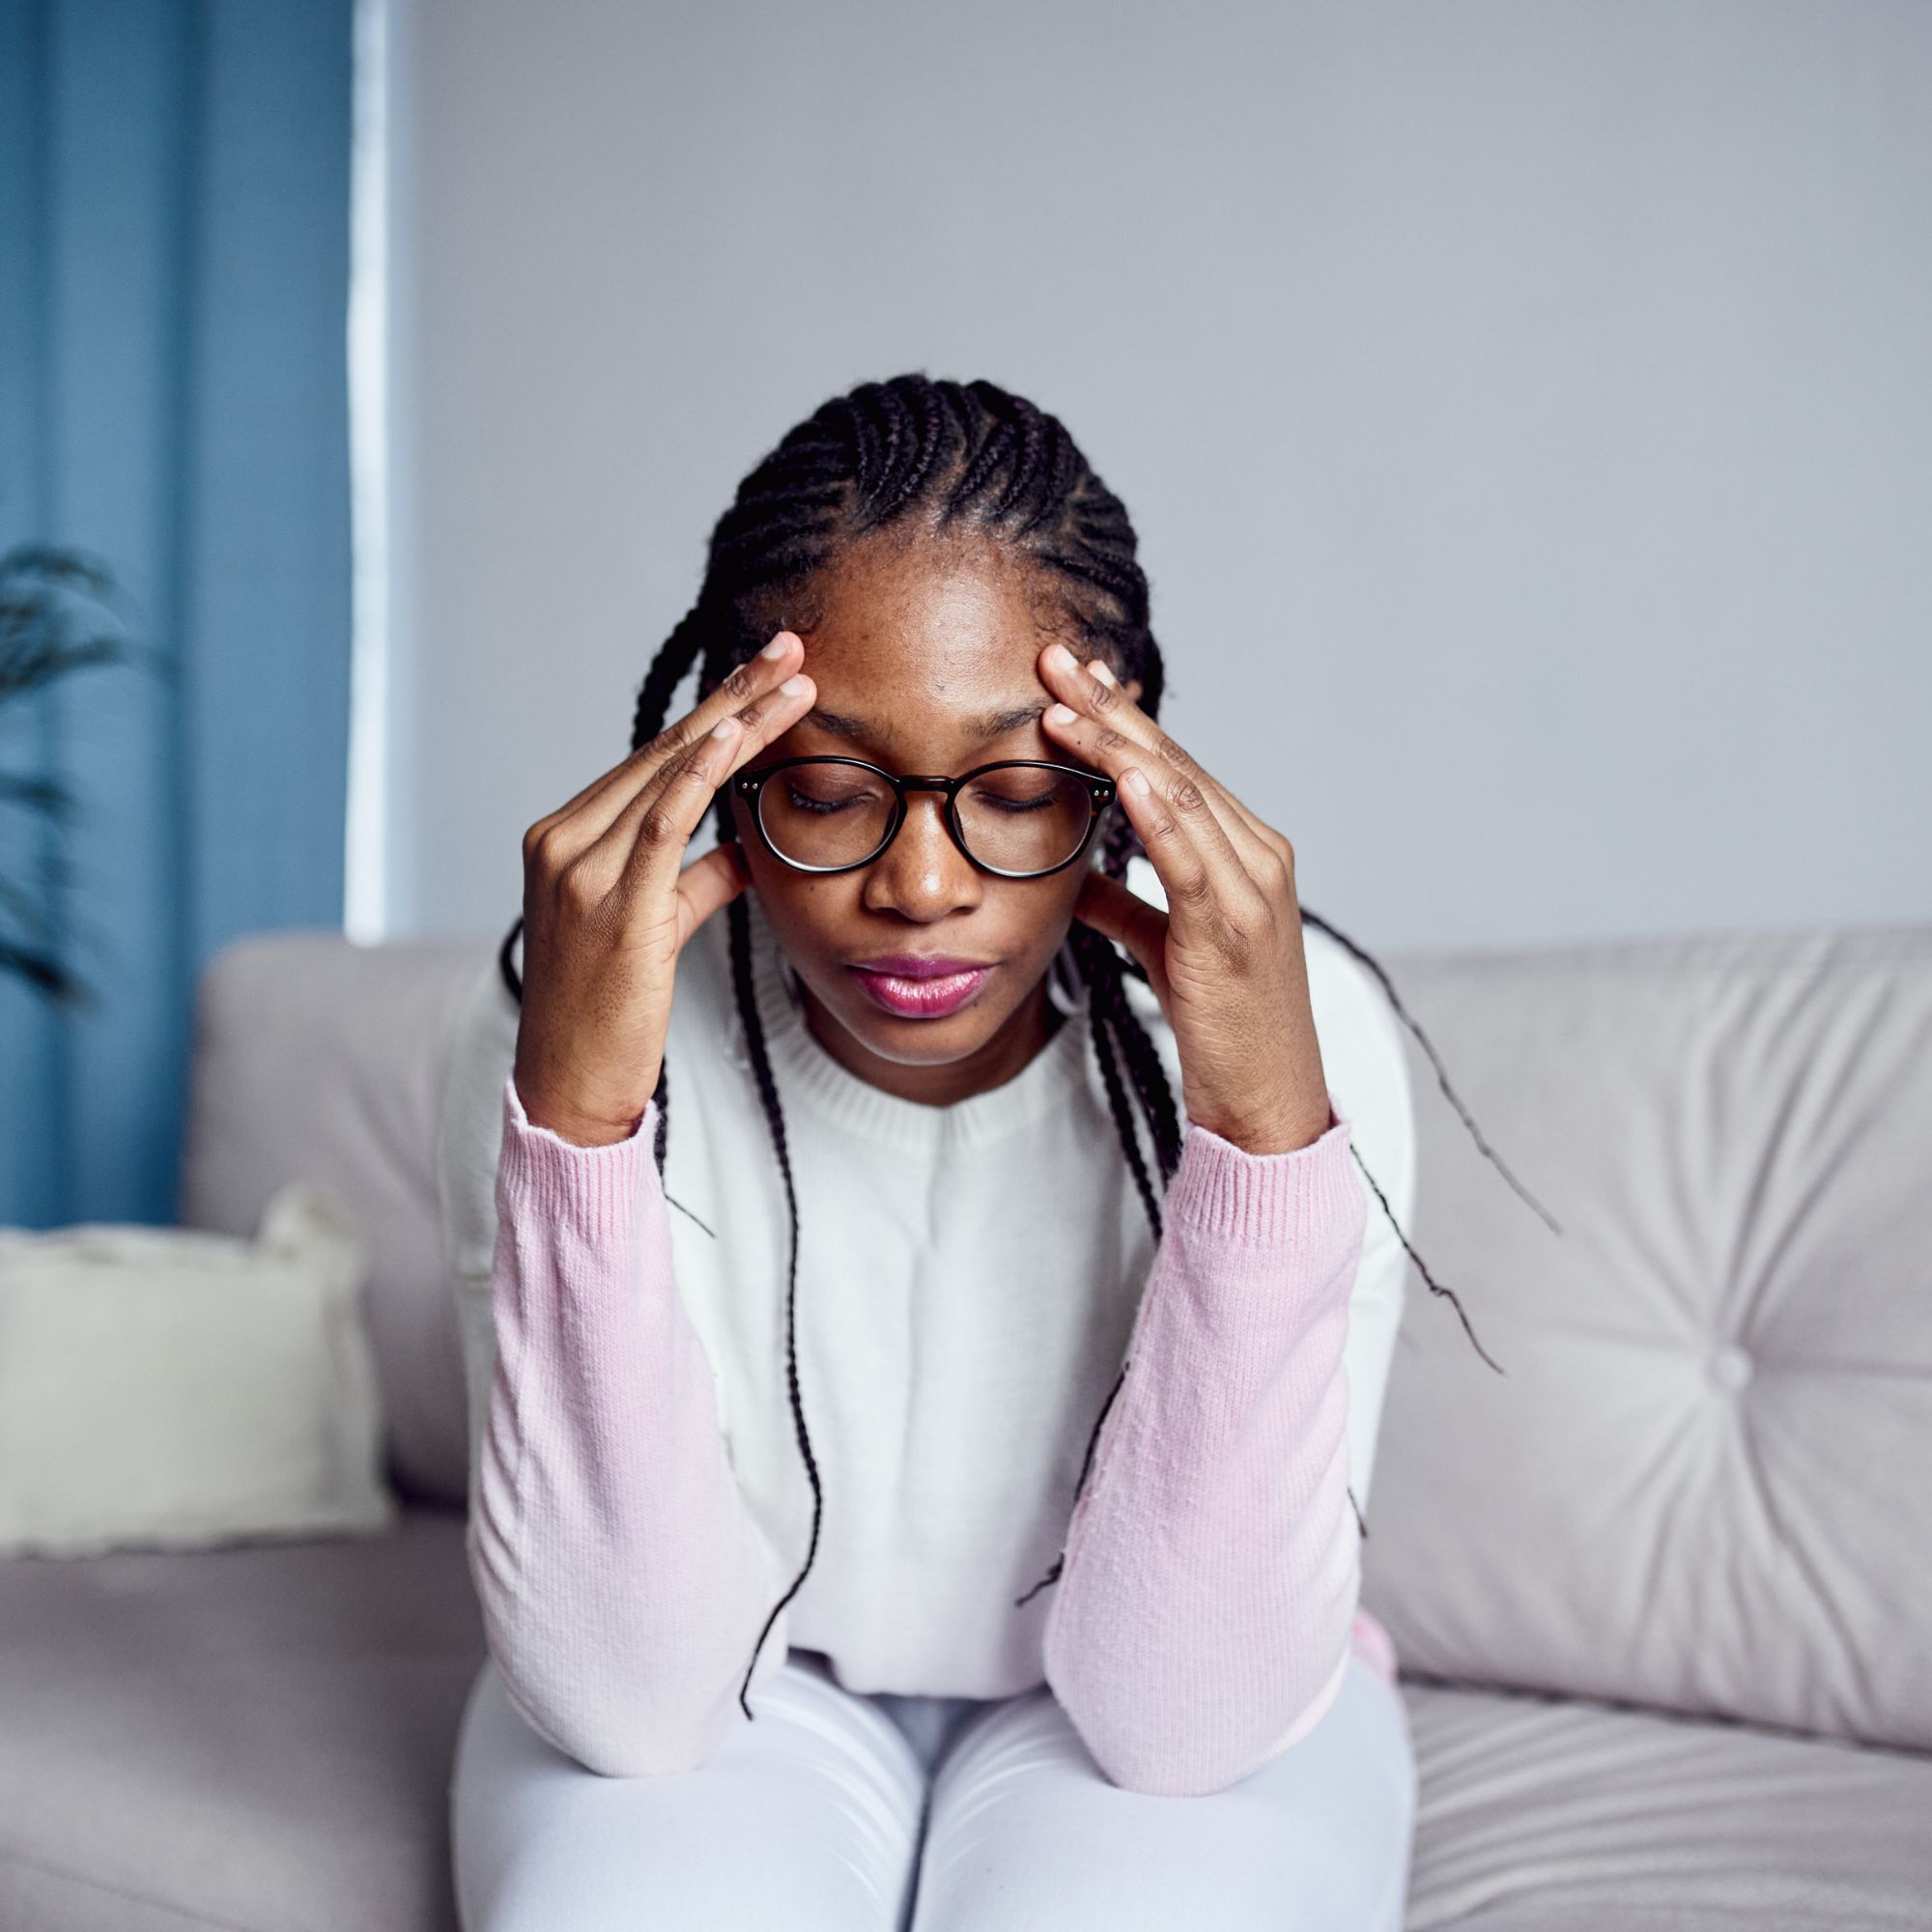 How to get rid of a migraine: 5 tips you may not have thought of